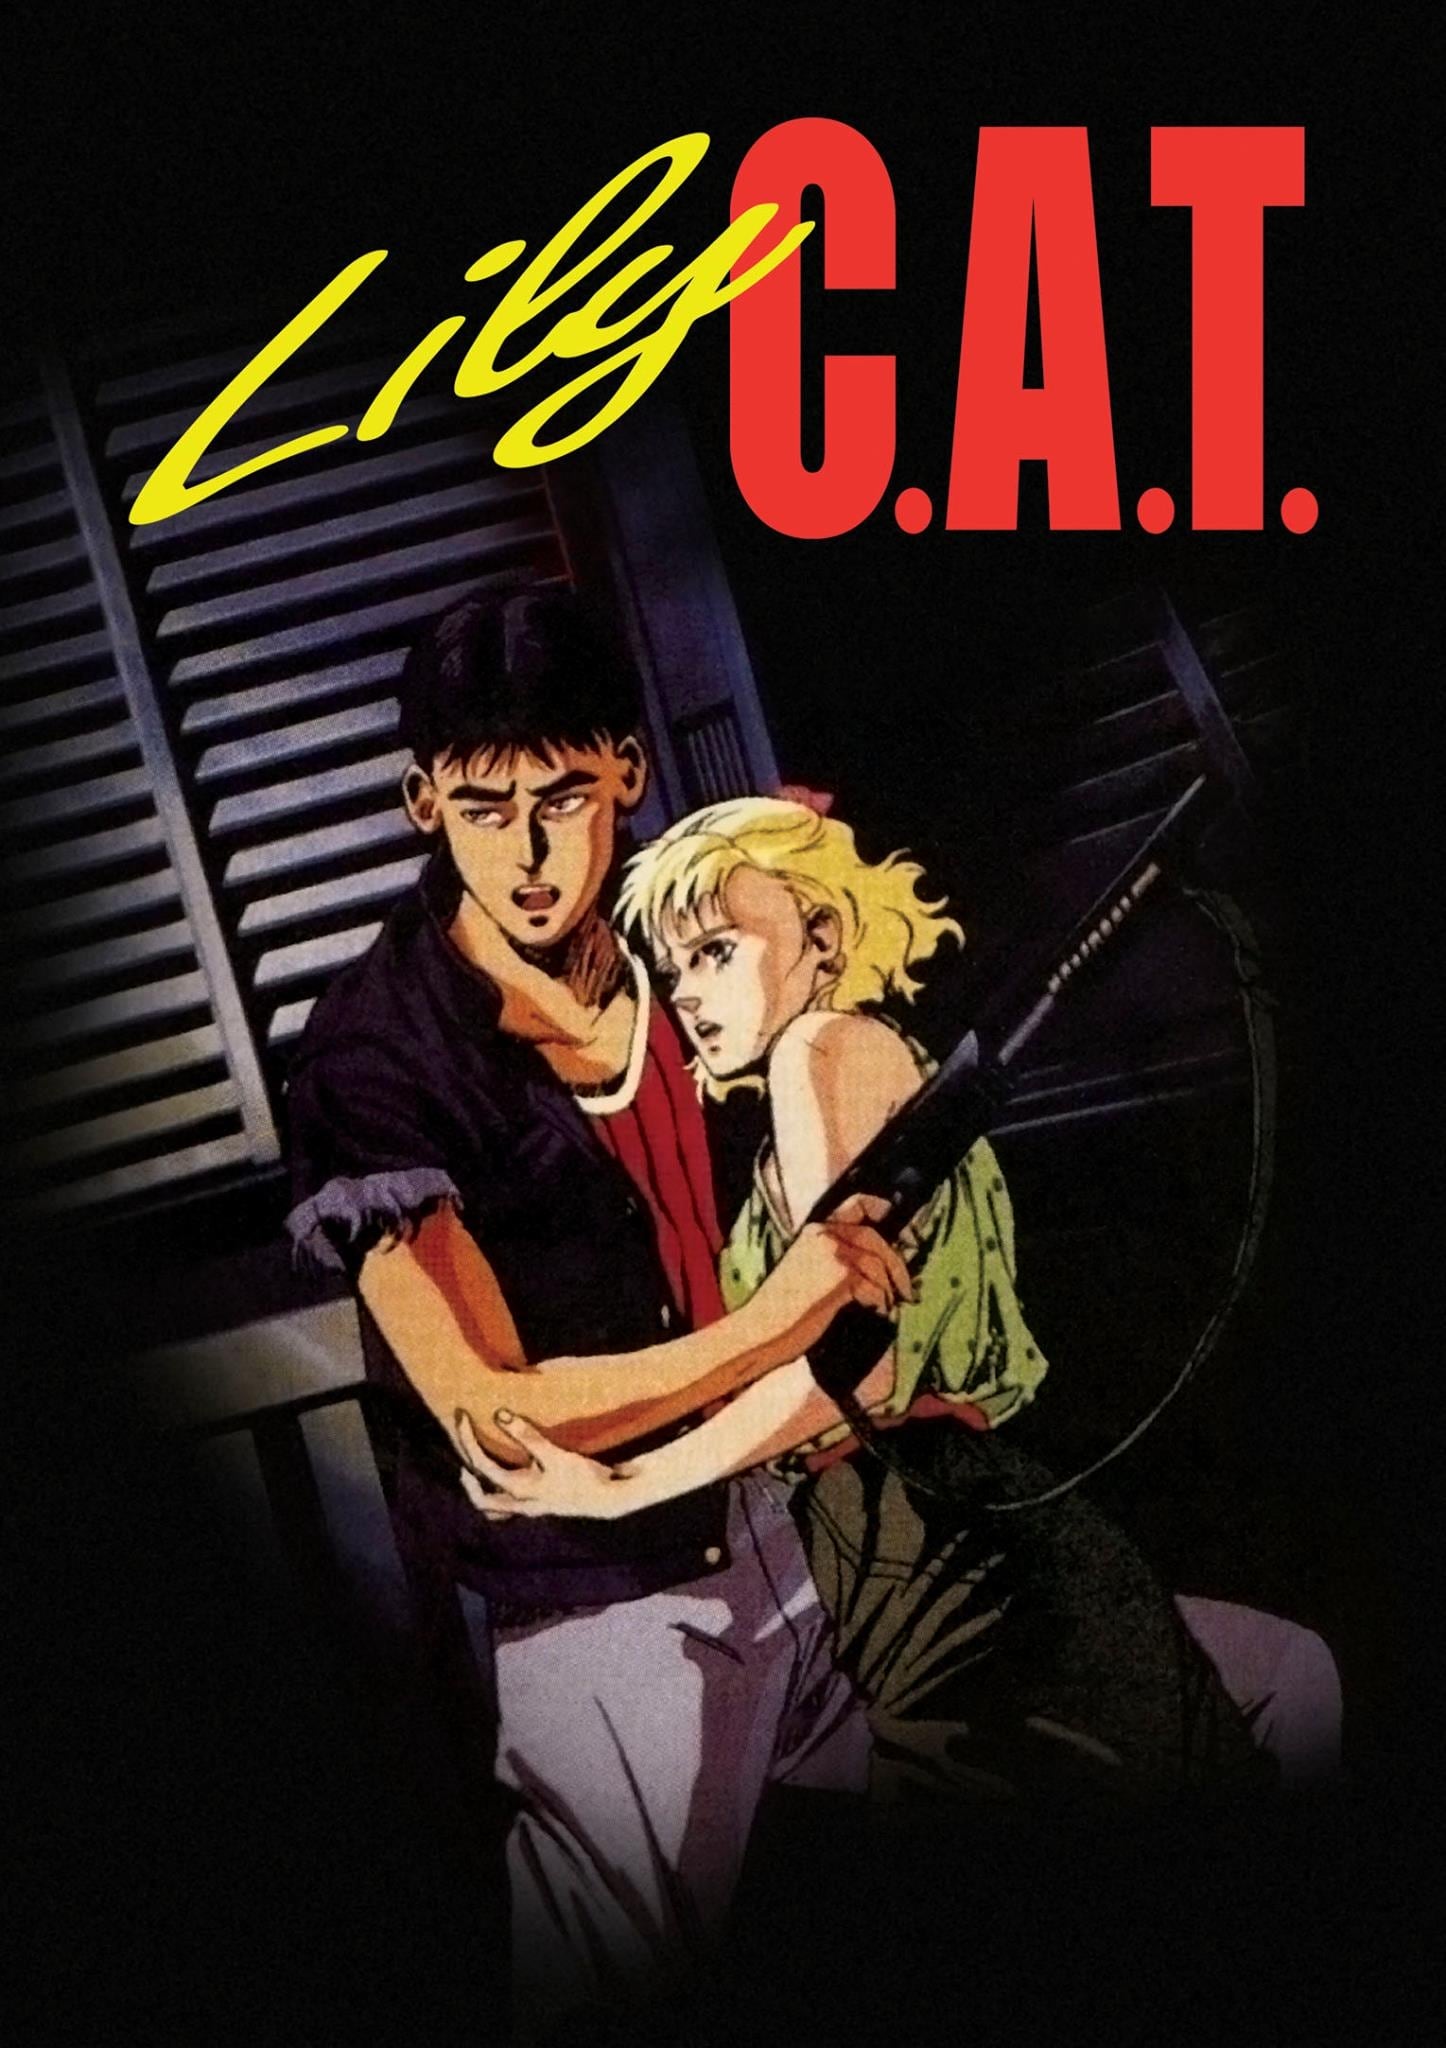 Lily C.A.T. (1987)